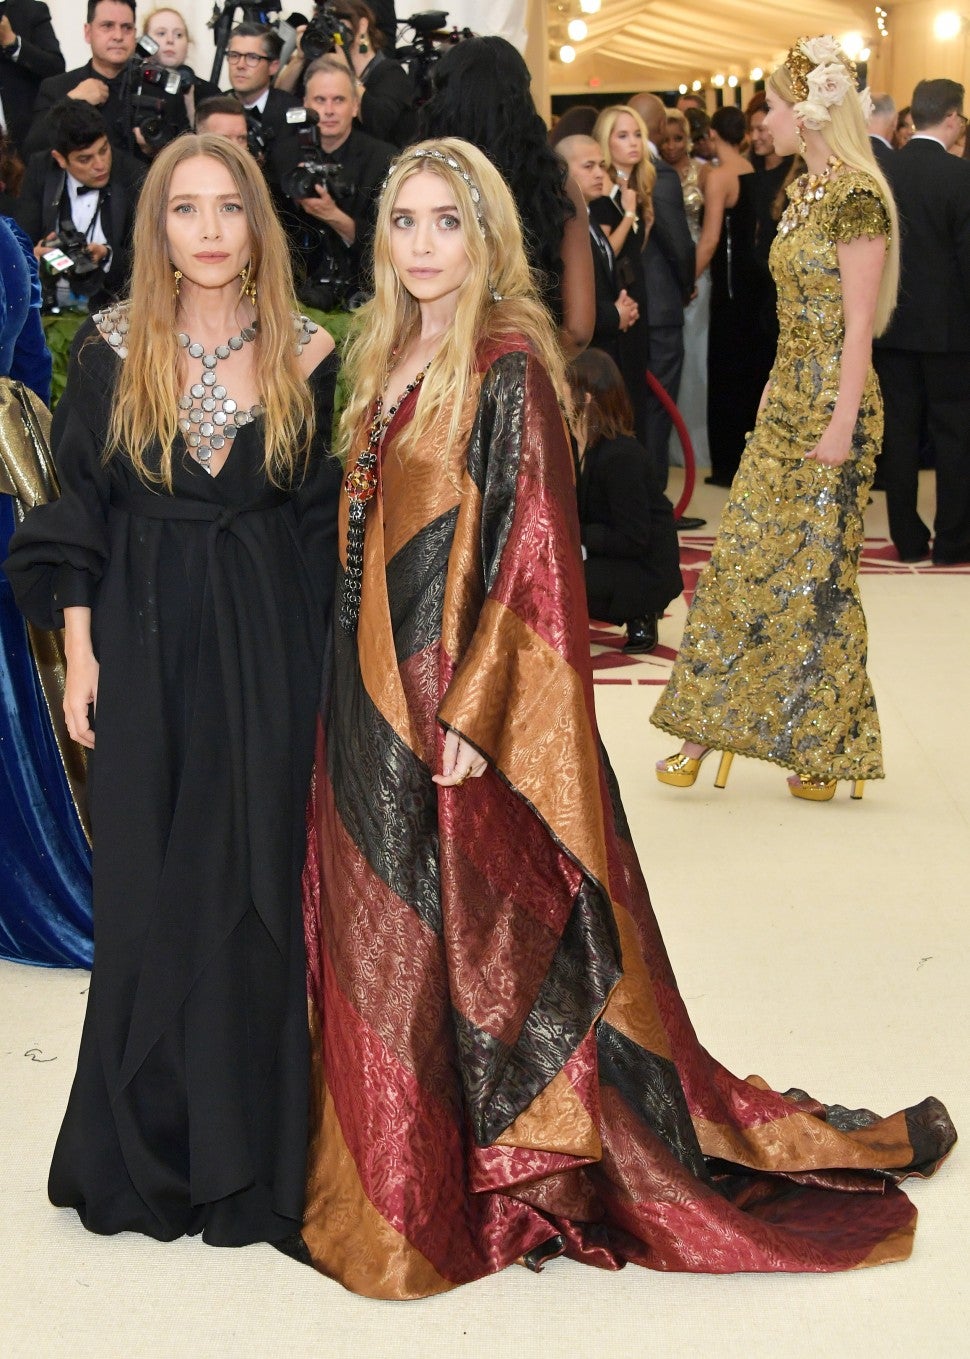 & Ashley Olsen Step Out at the 2018 Met Gala | Entertainment Tonight